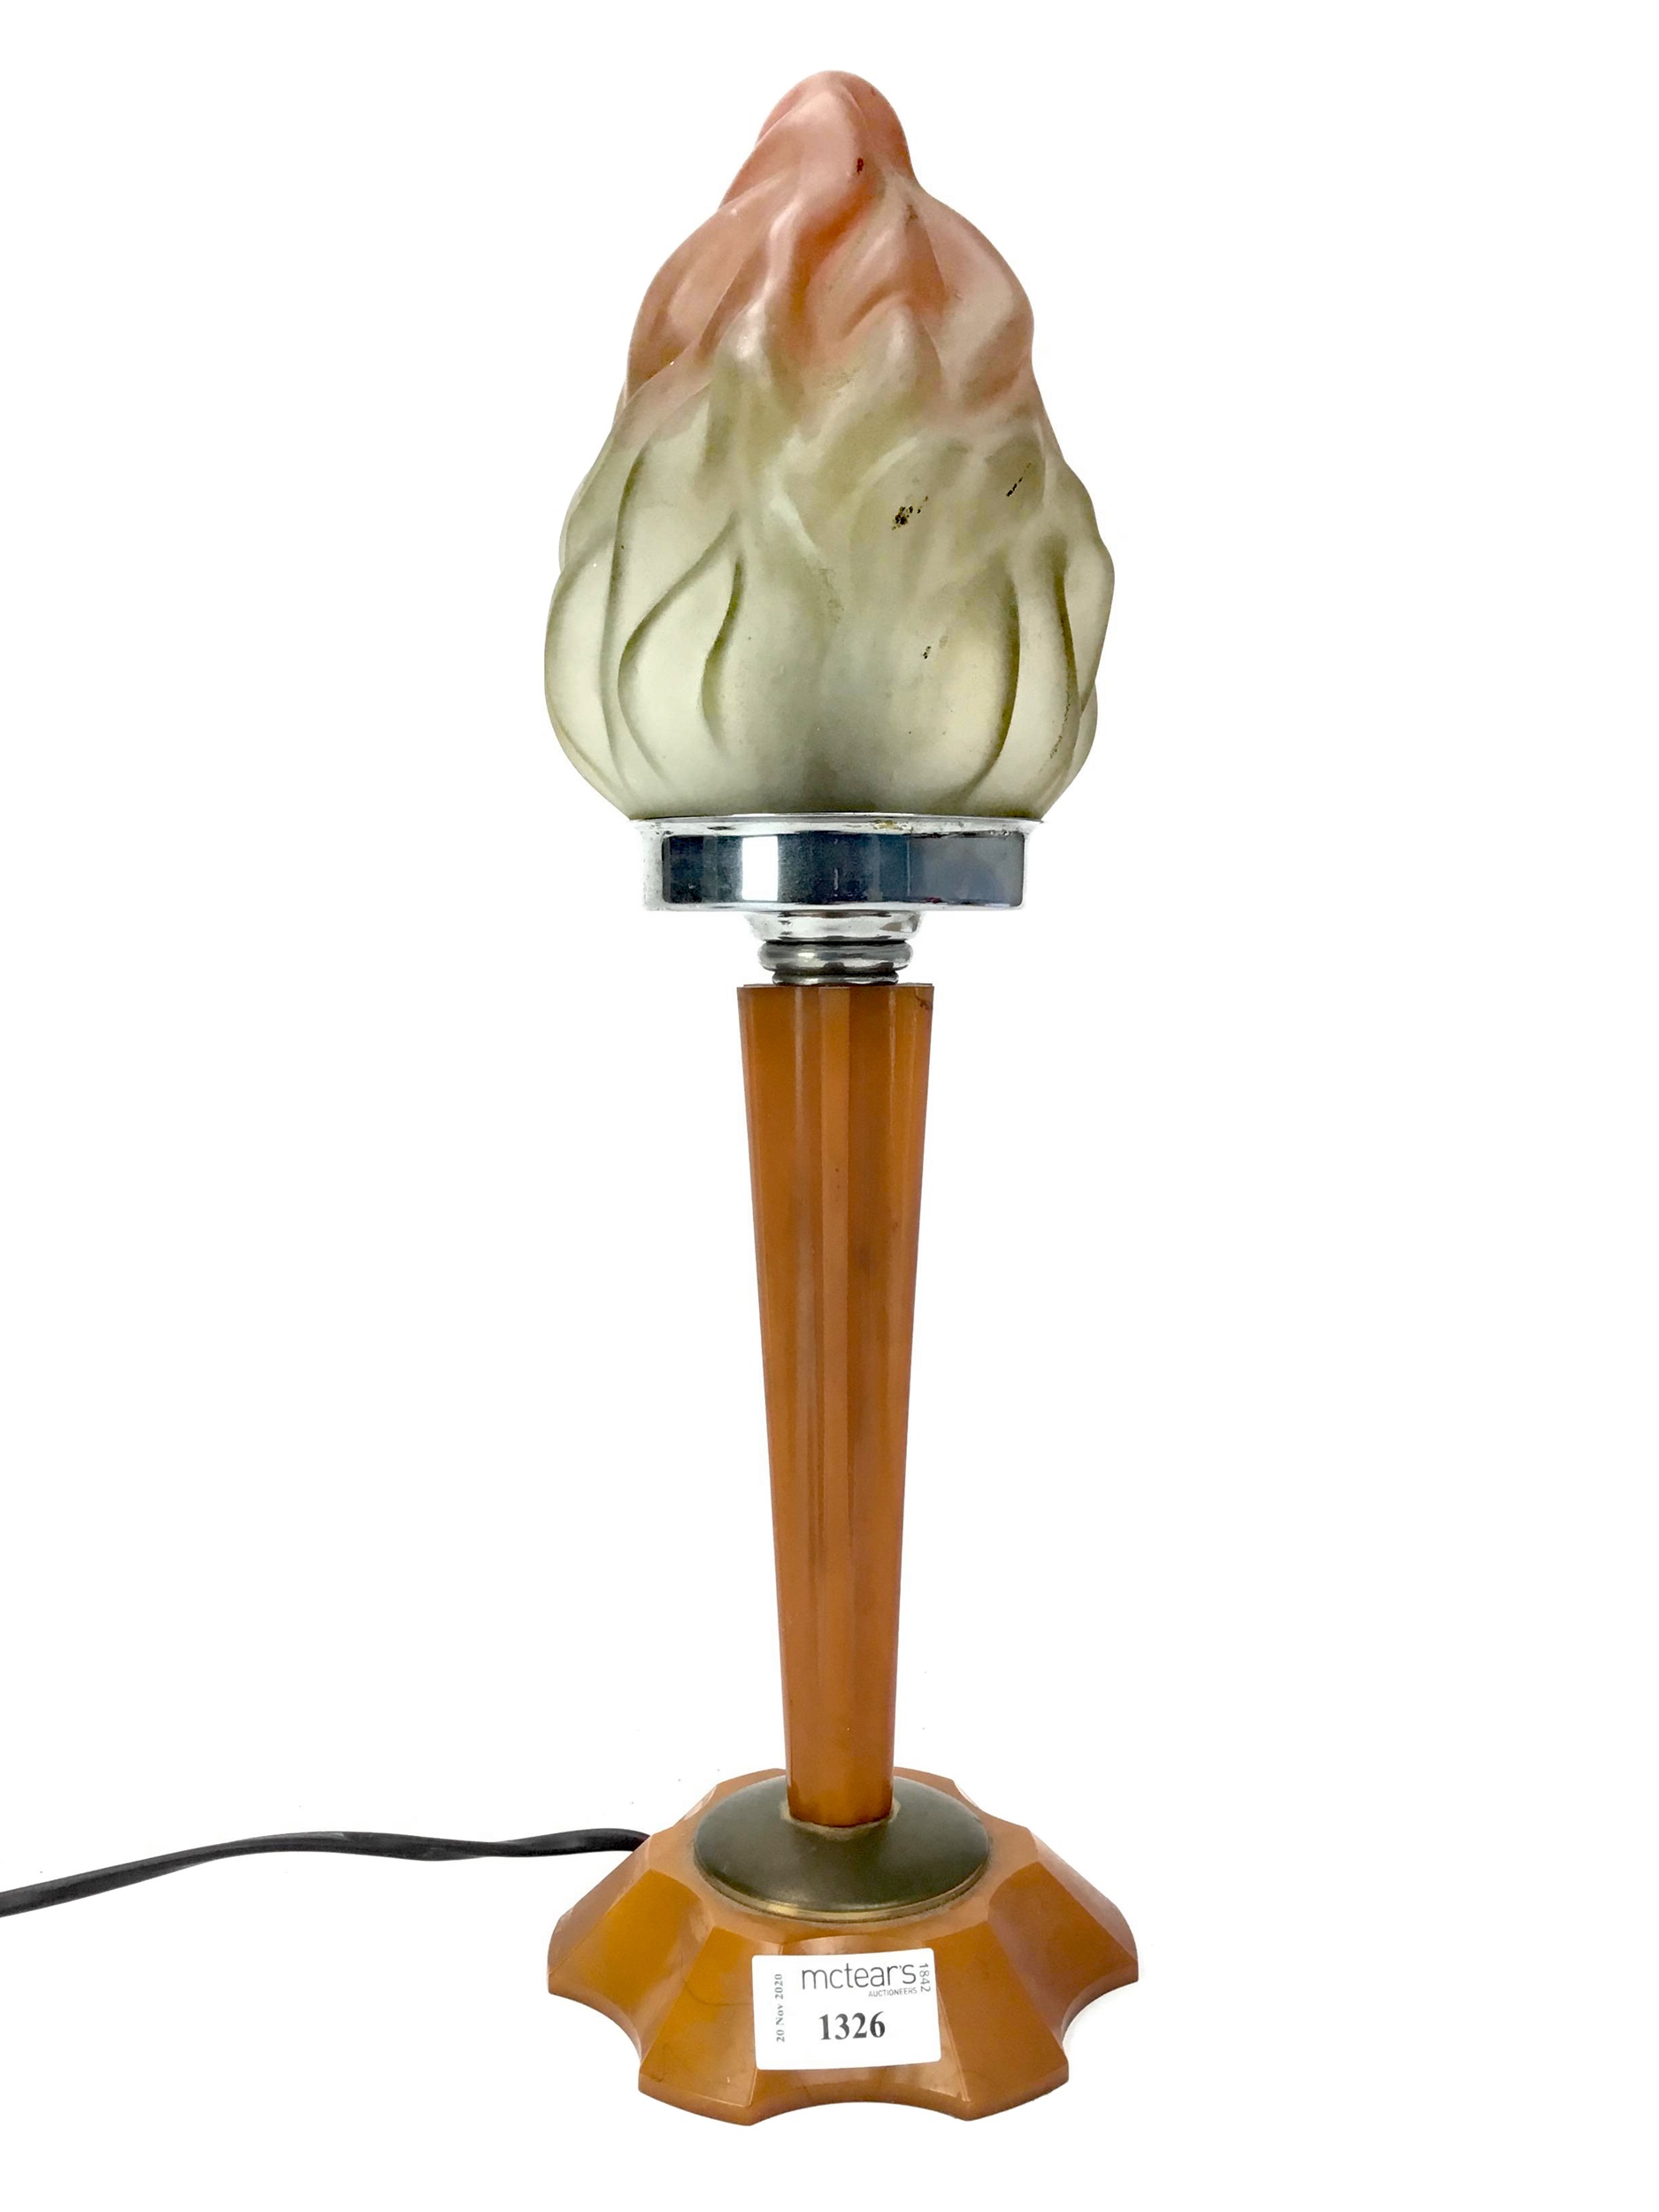 AN ART DECO TABLE LAMP WITH A GLASS FLAME SHADE